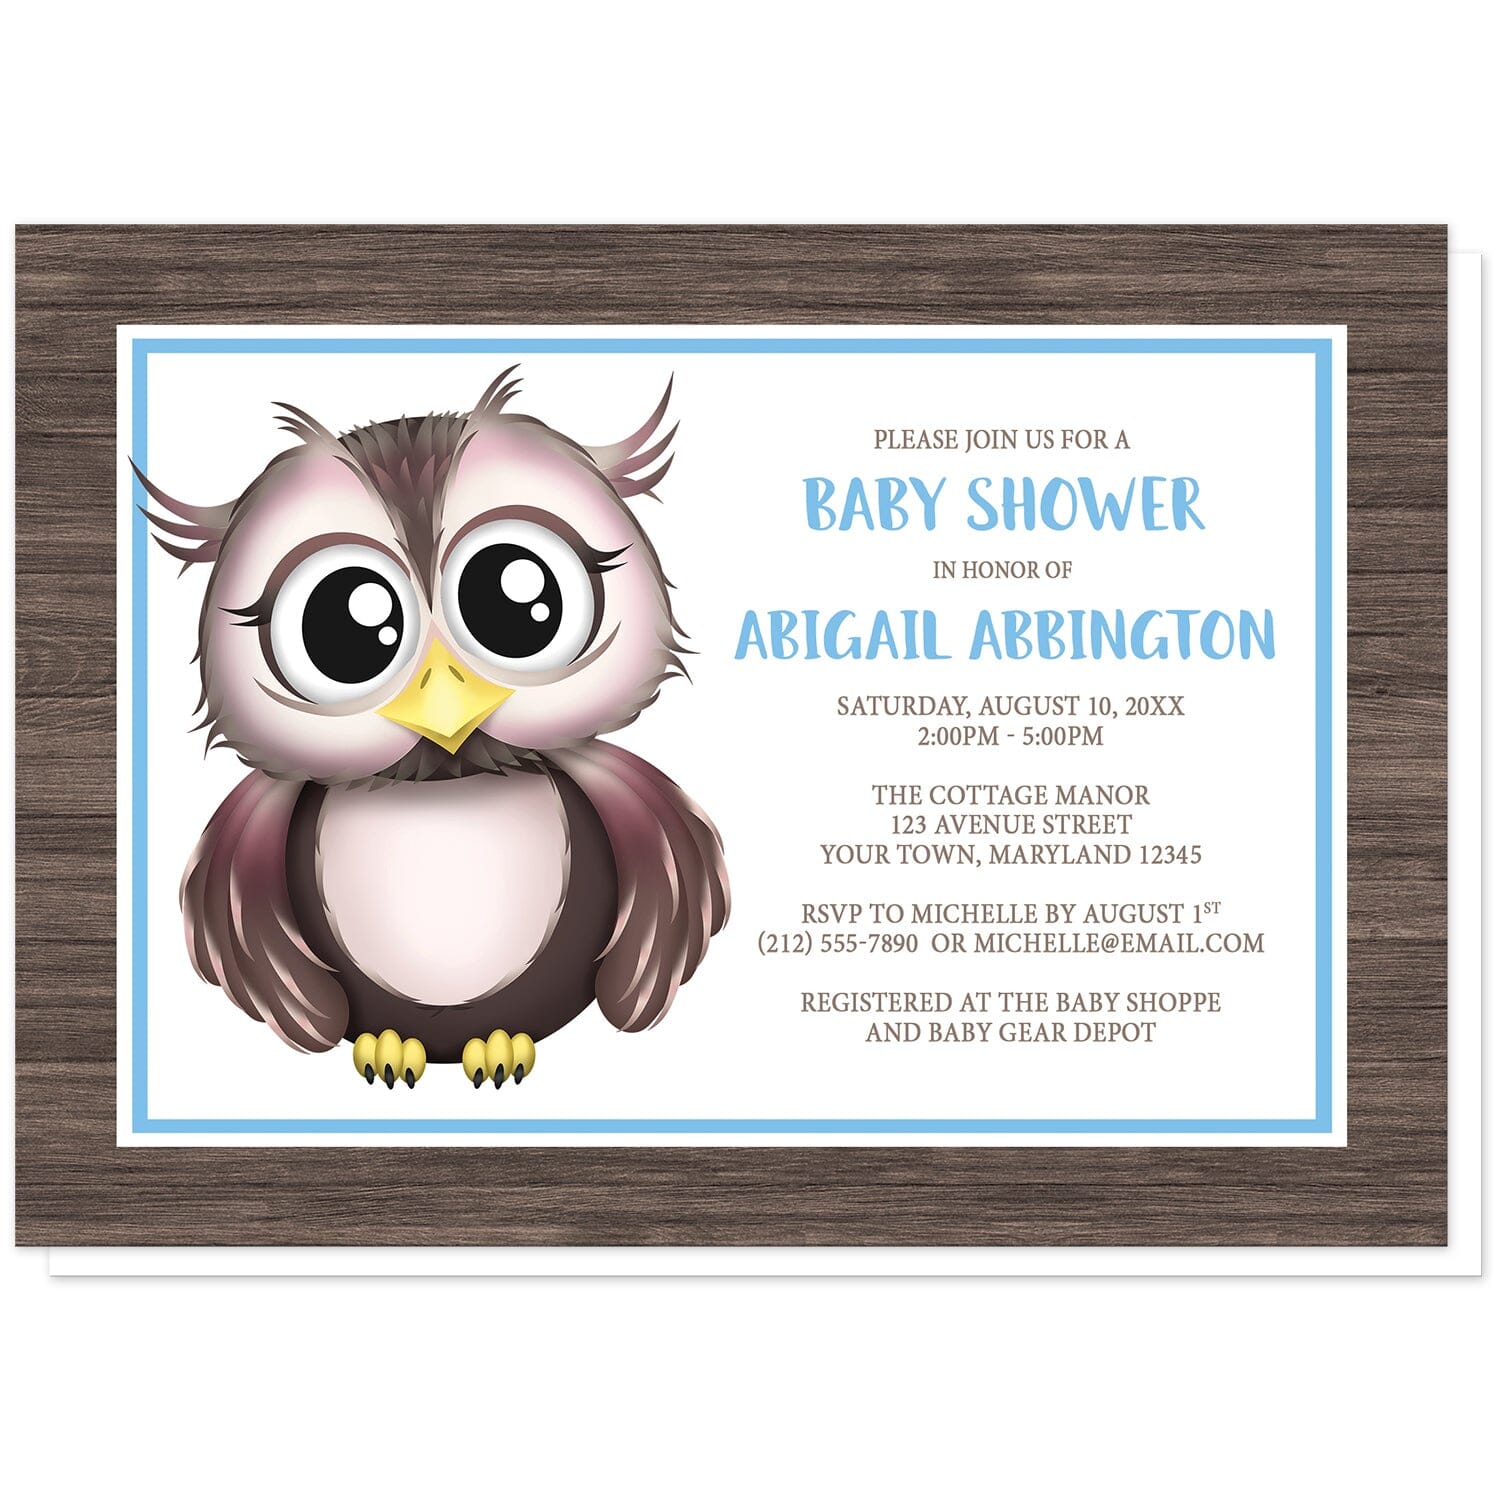 Adorable Owl Blue and Brown Baby Shower Invitations at Artistically Invited. Adorable owl blue and brown baby shower invitations with an illustration of a cute brown owl and a rustic brown wood frame background design. This cute little owl stands inside a white rectangle outlined in blue and white. The personalized information you provide for your baby shower celebration will be printed in blue and brown over white to the right of the cute owl.